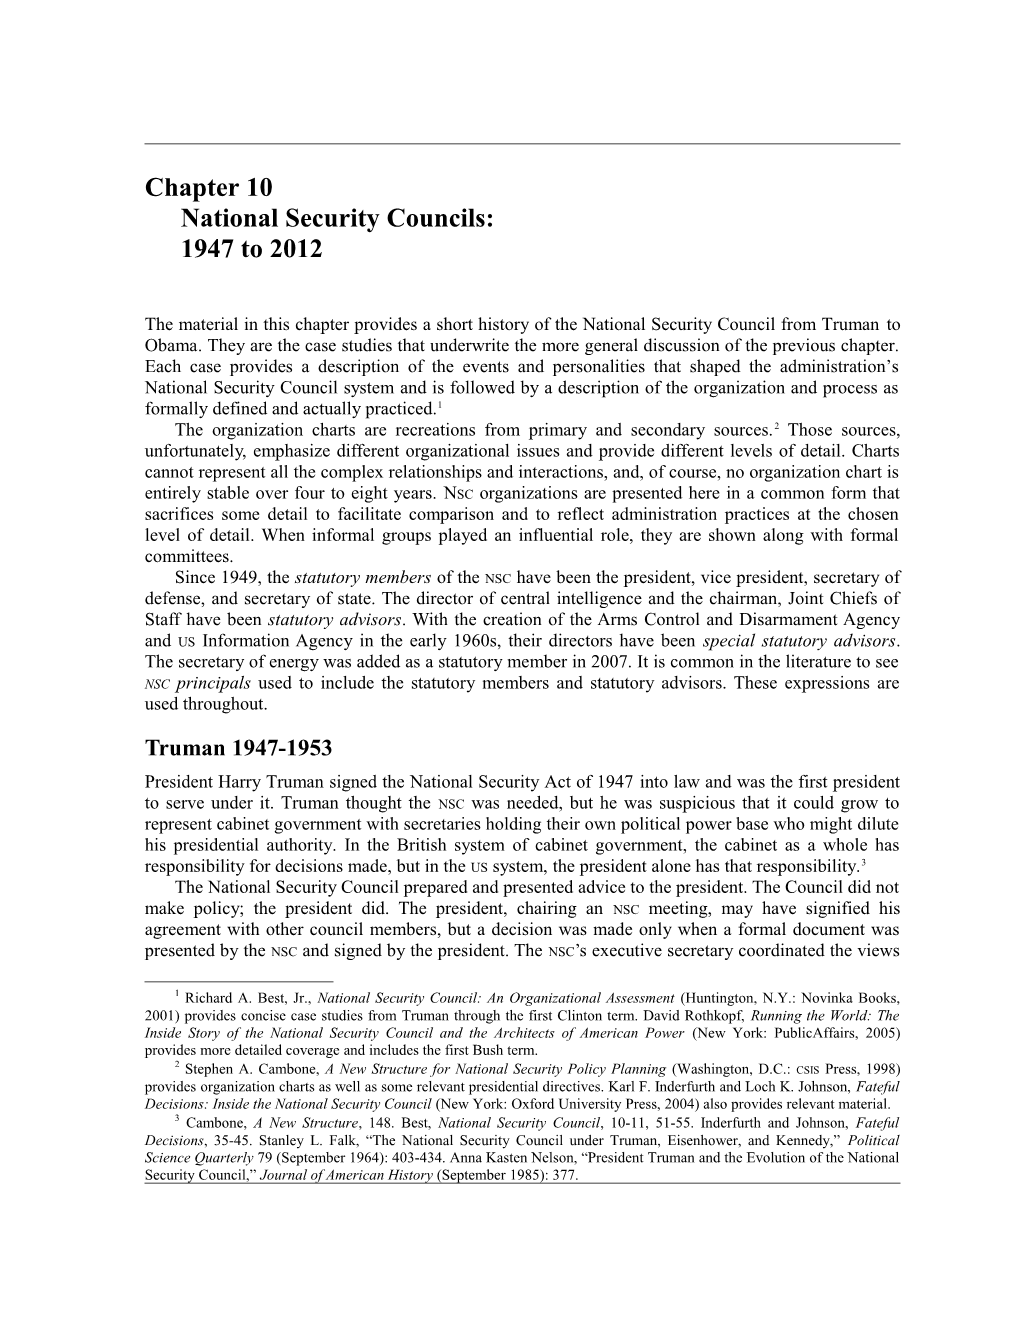 Chapter 10National Security Councils:1947 to 2012